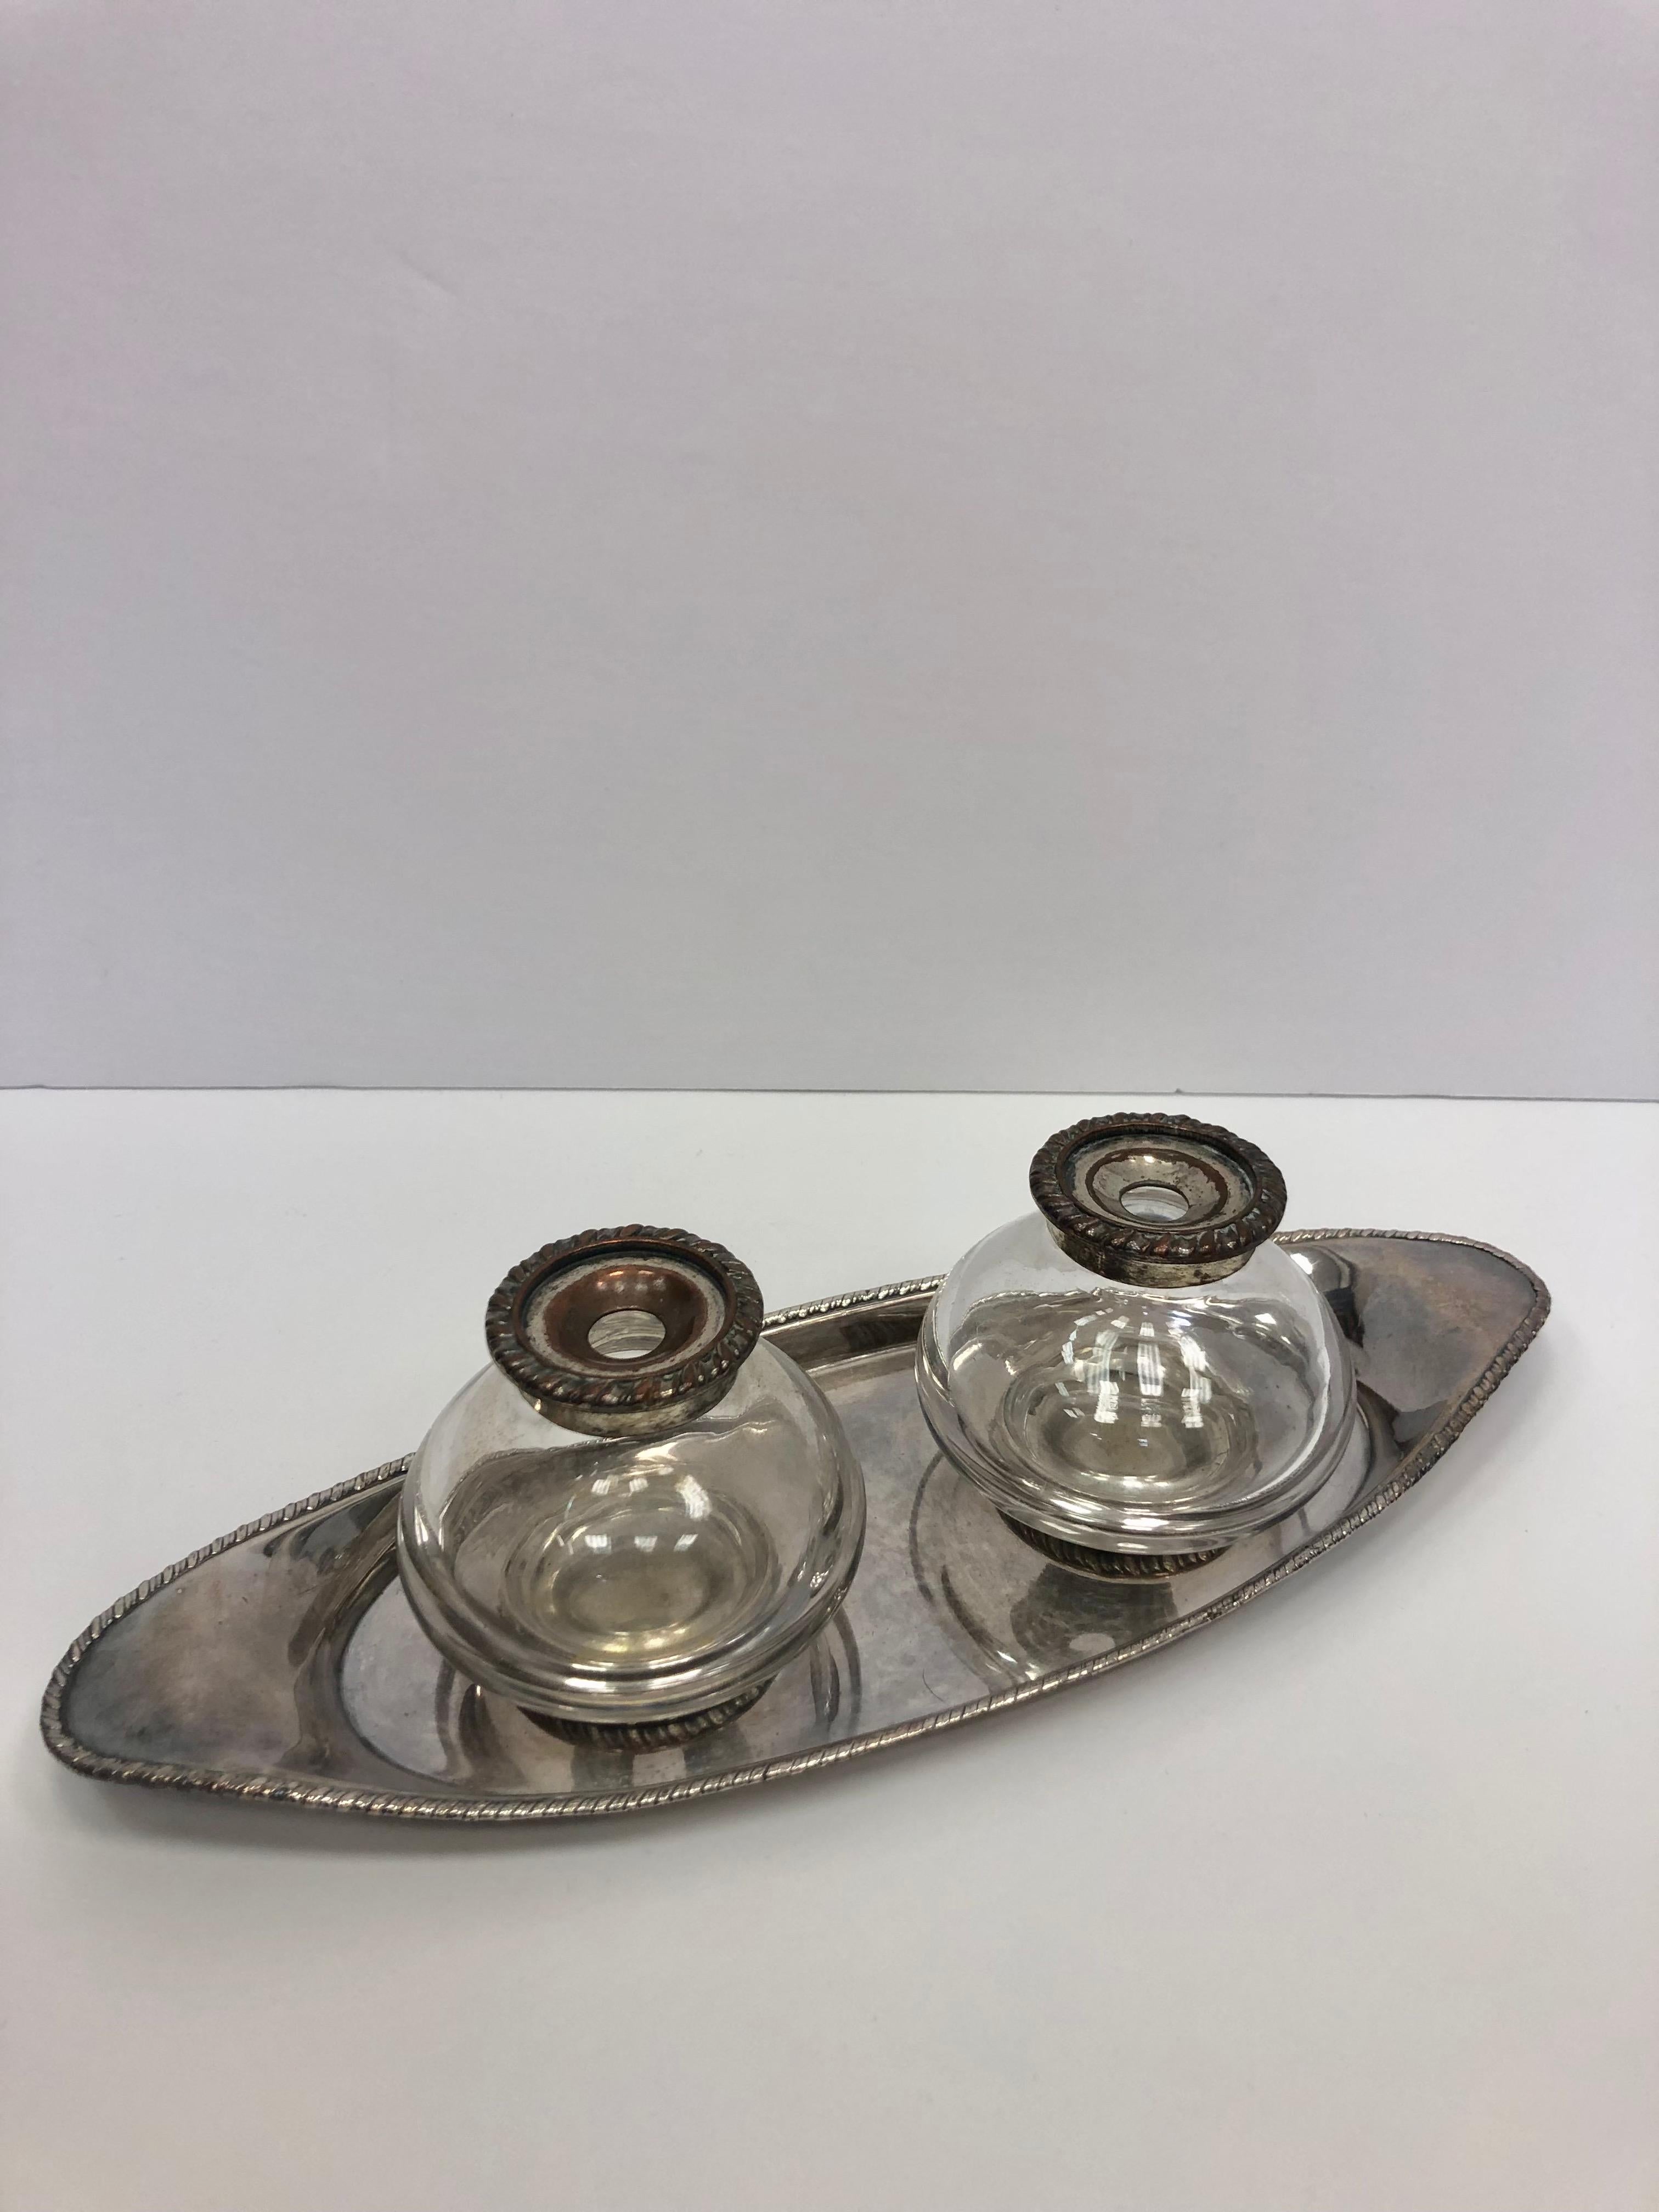 Beautiful pair of crystal inkwells on an oval silver plated tray. The tray has a nice rope detailing. Circa 1890 England.